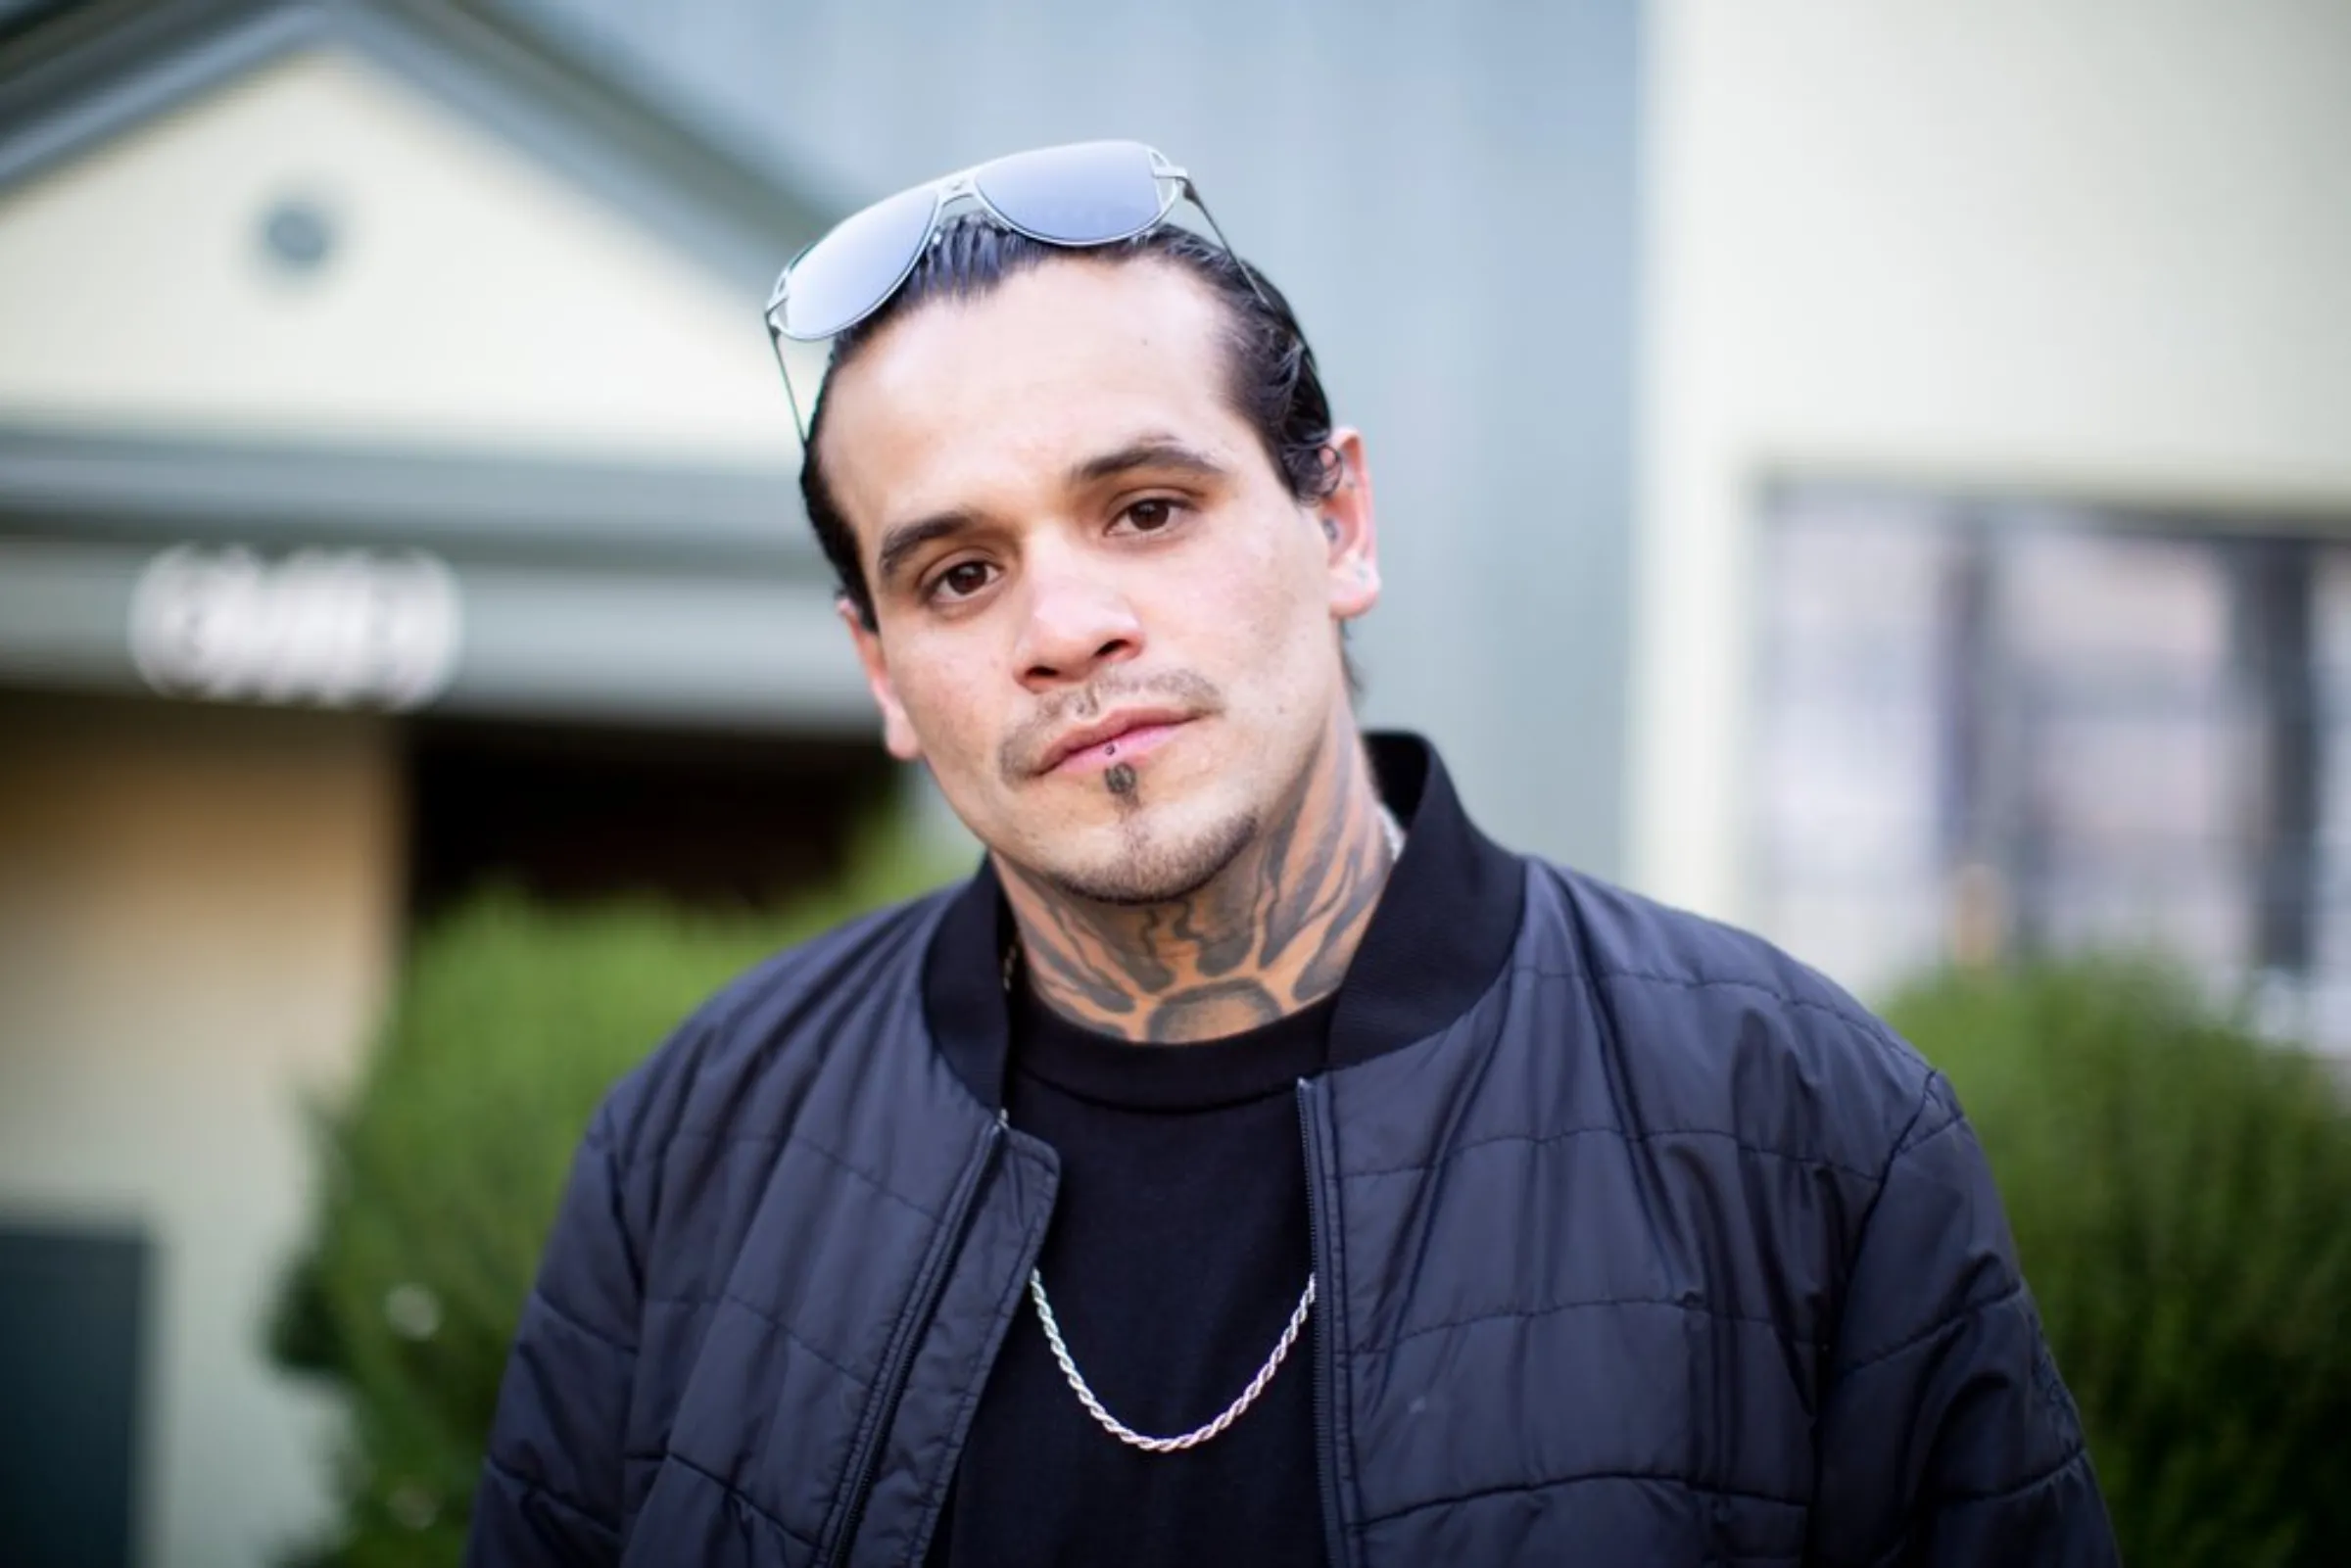 Ex-gang member Ramon Ramos stands outside his mother’s apartment in North Hollywood, California, May 20, 2021